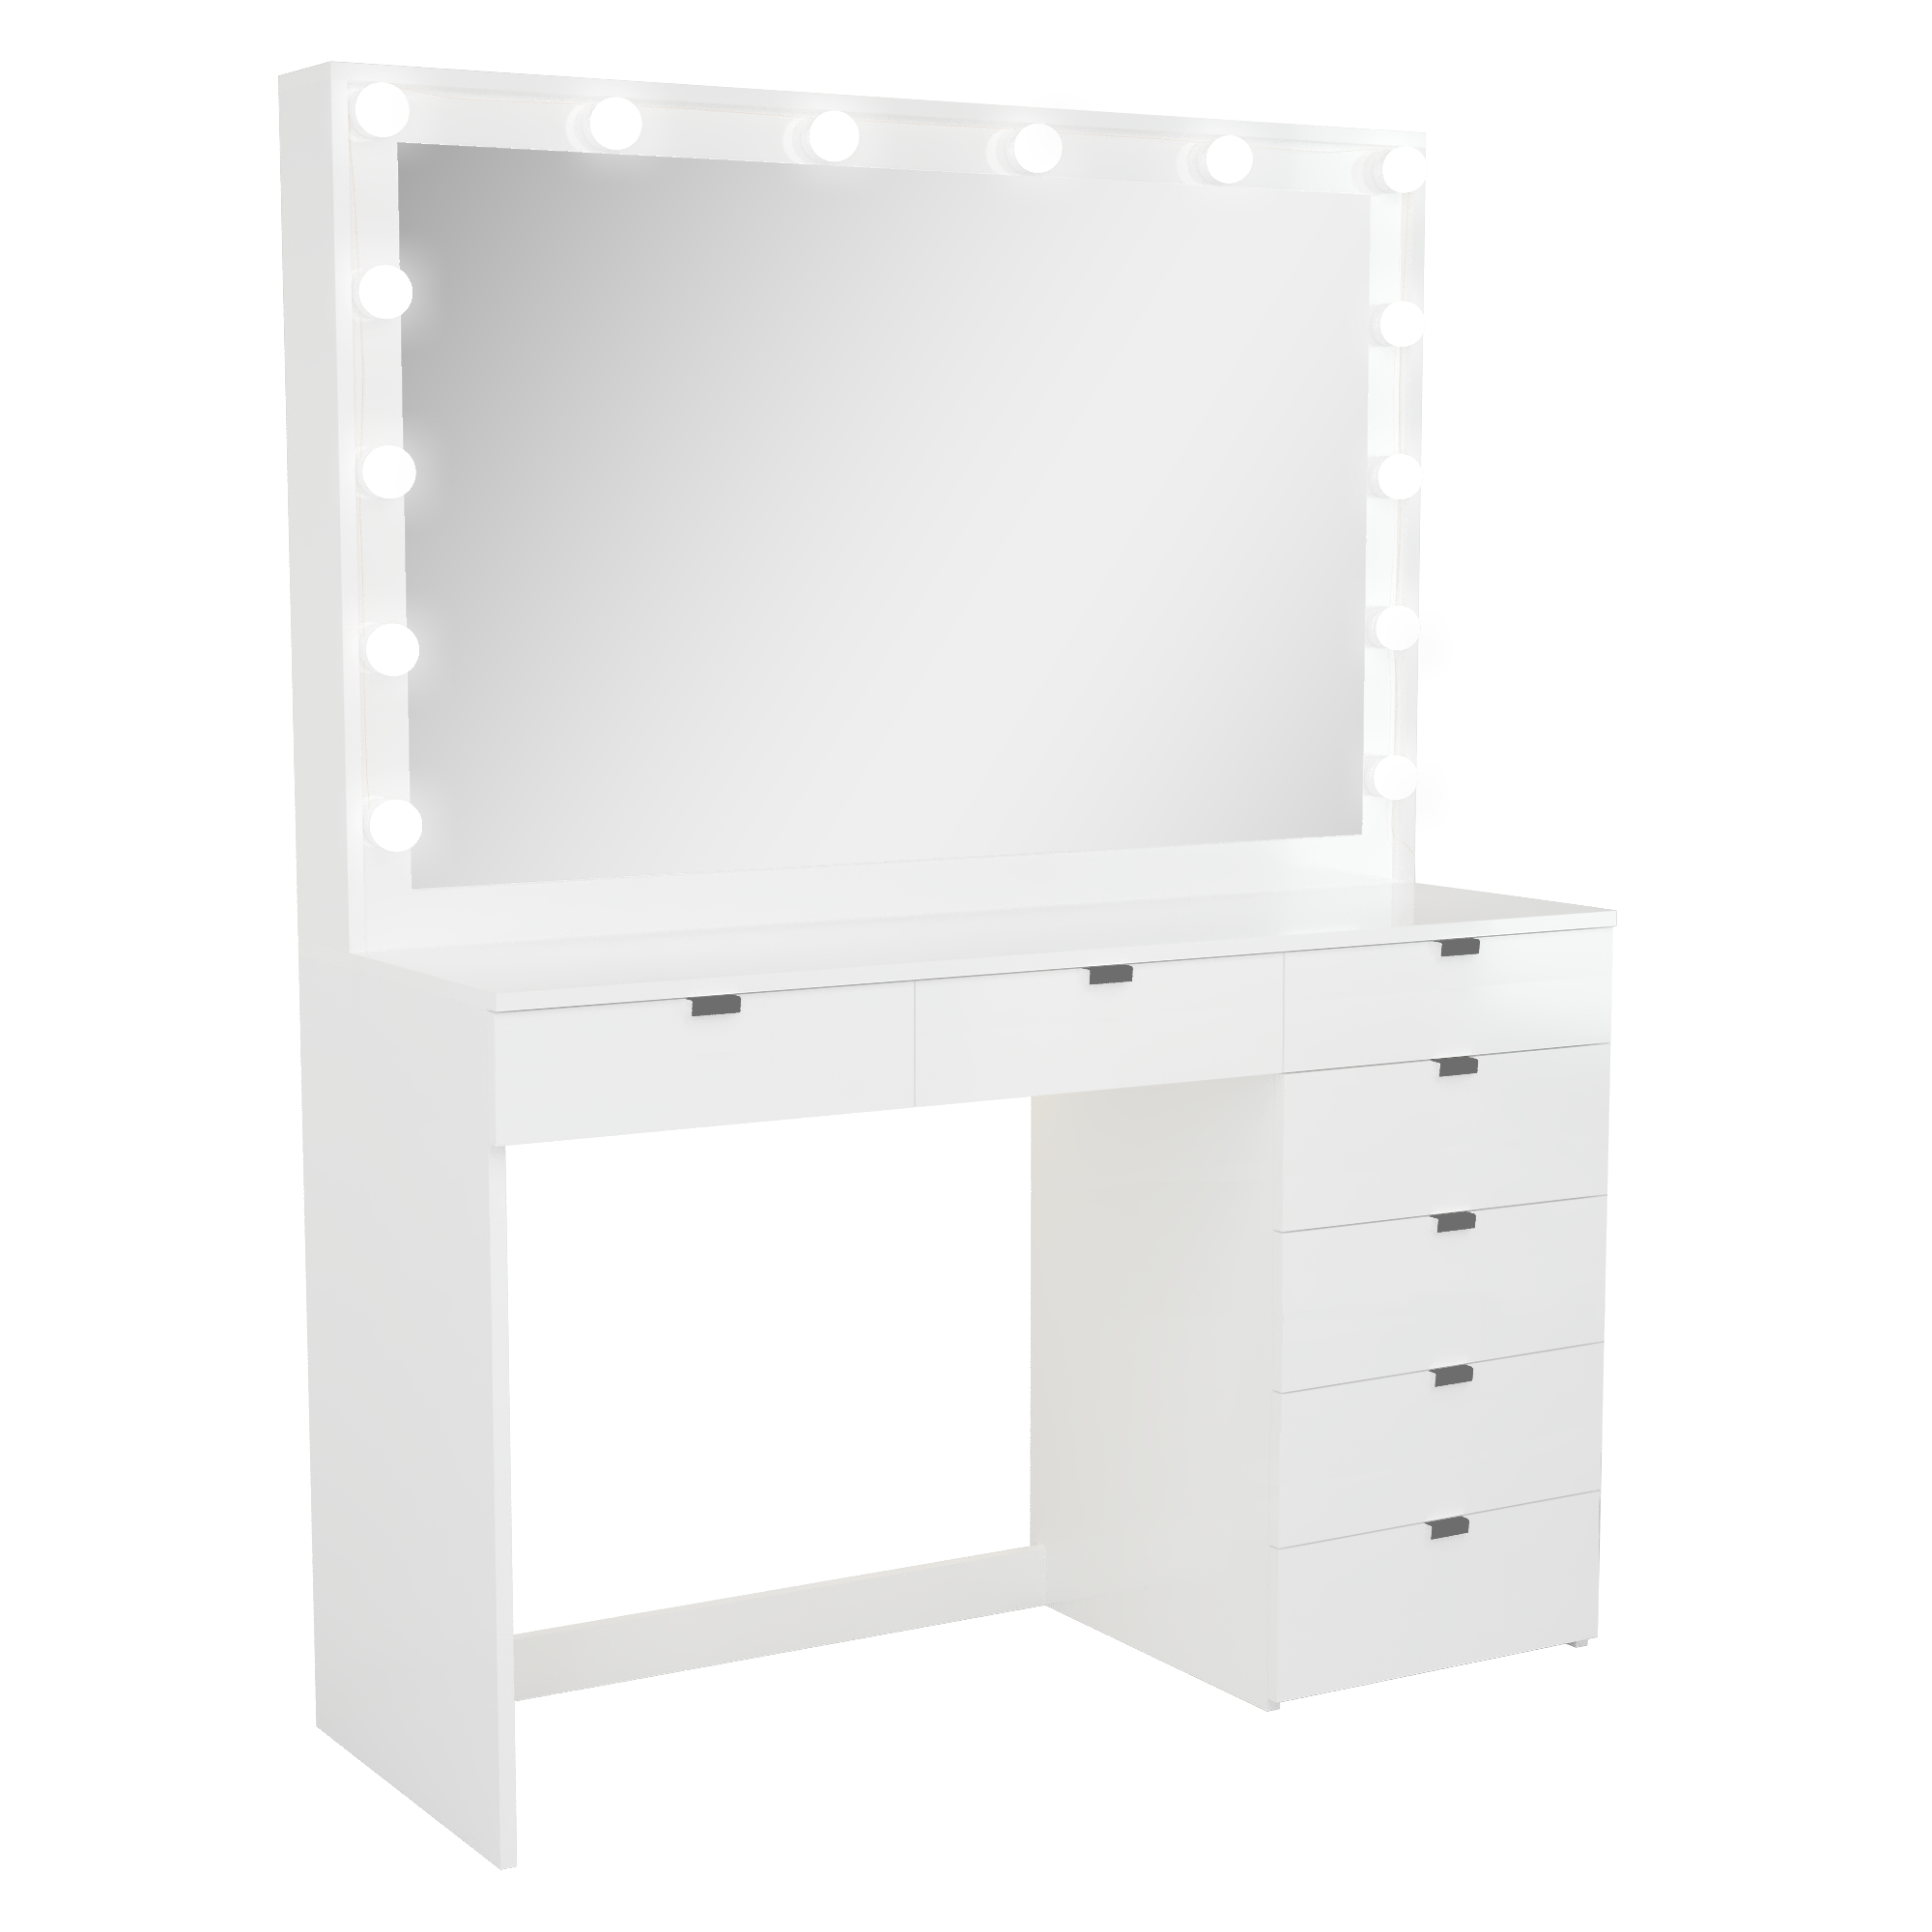 Ember Interiors Peggy Modern White Painted Vanity Table, Lights, USB Port, for Bedroom - image 4 of 6